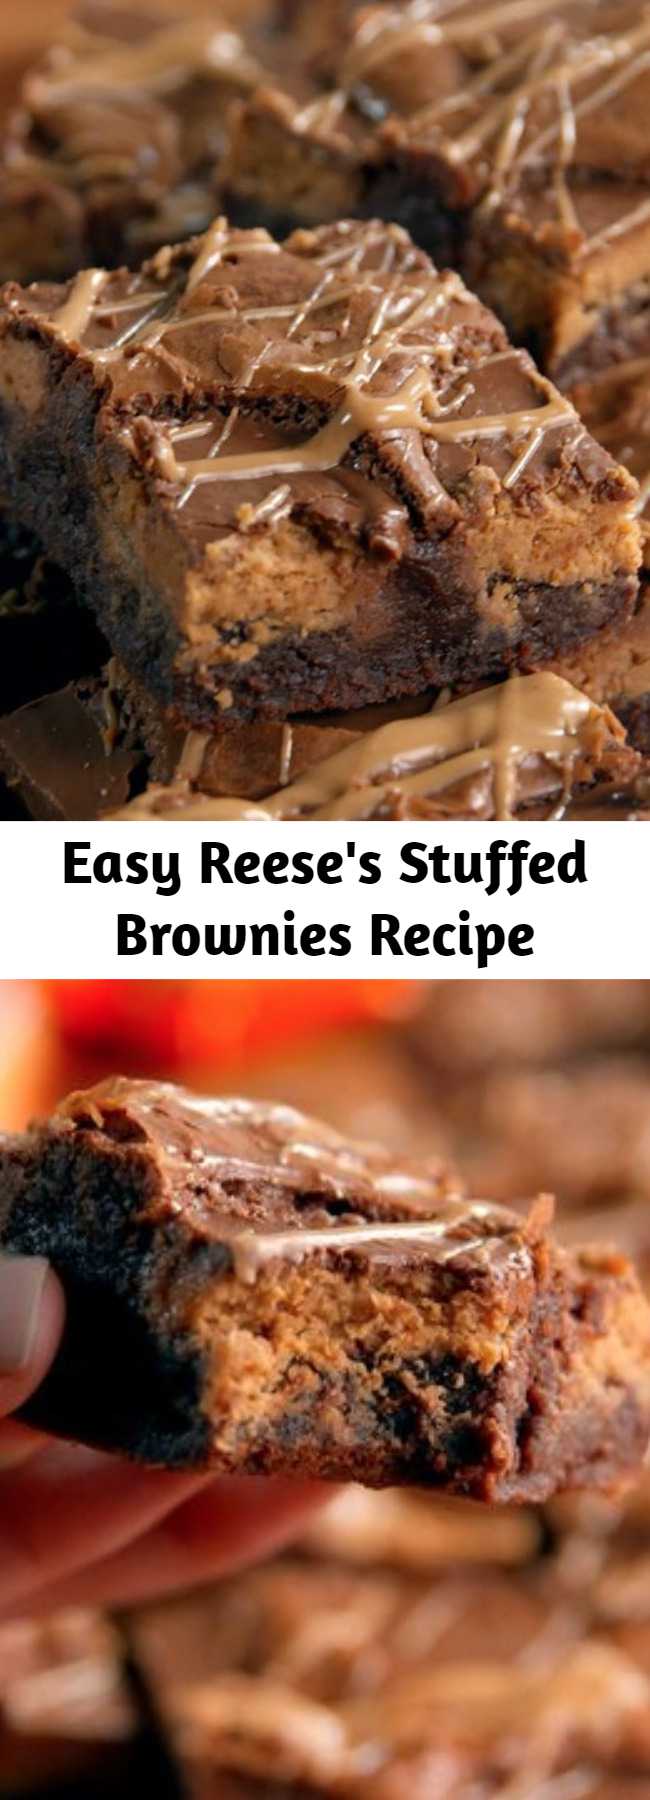 Easy Reese's Stuffed Brownies Recipe - Give your average brownies a major upgrade with this recipe for Reese's stuffed brownies. But seriously, how could they not be good?